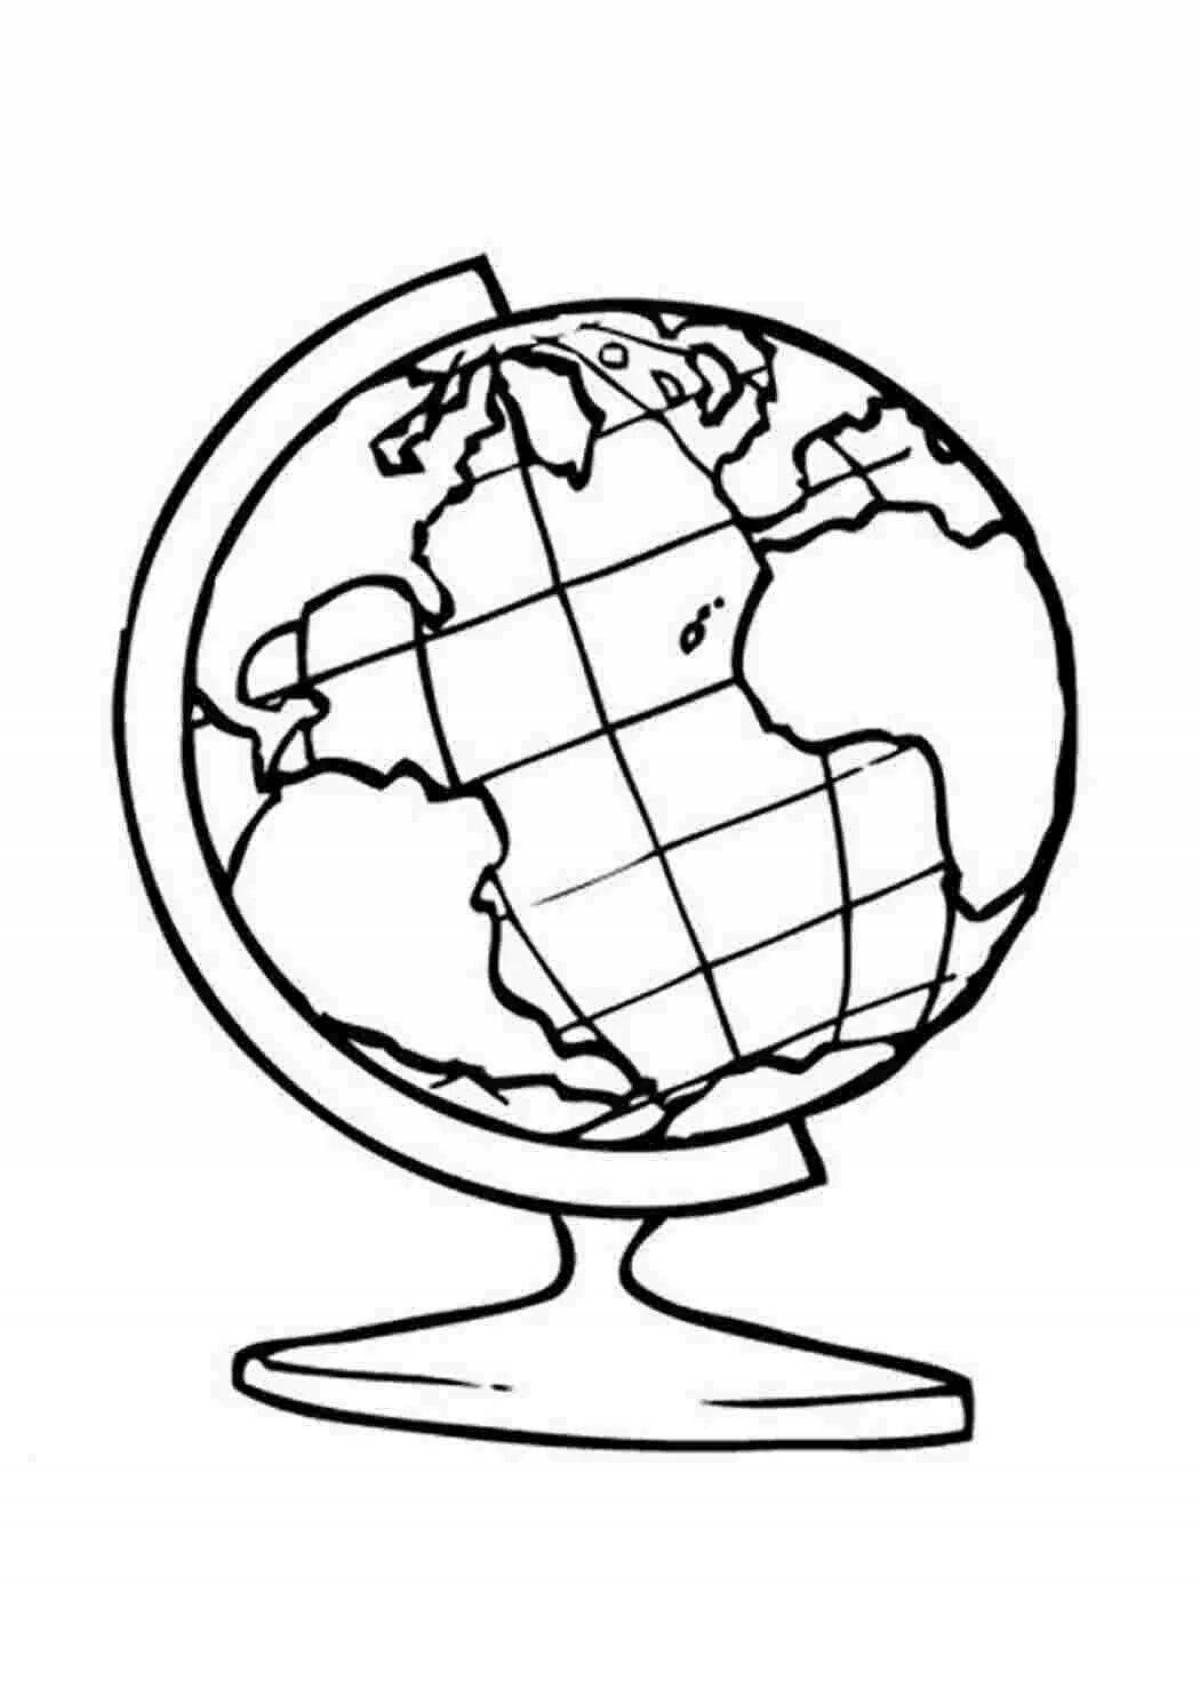 Bright globe coloring for kids template